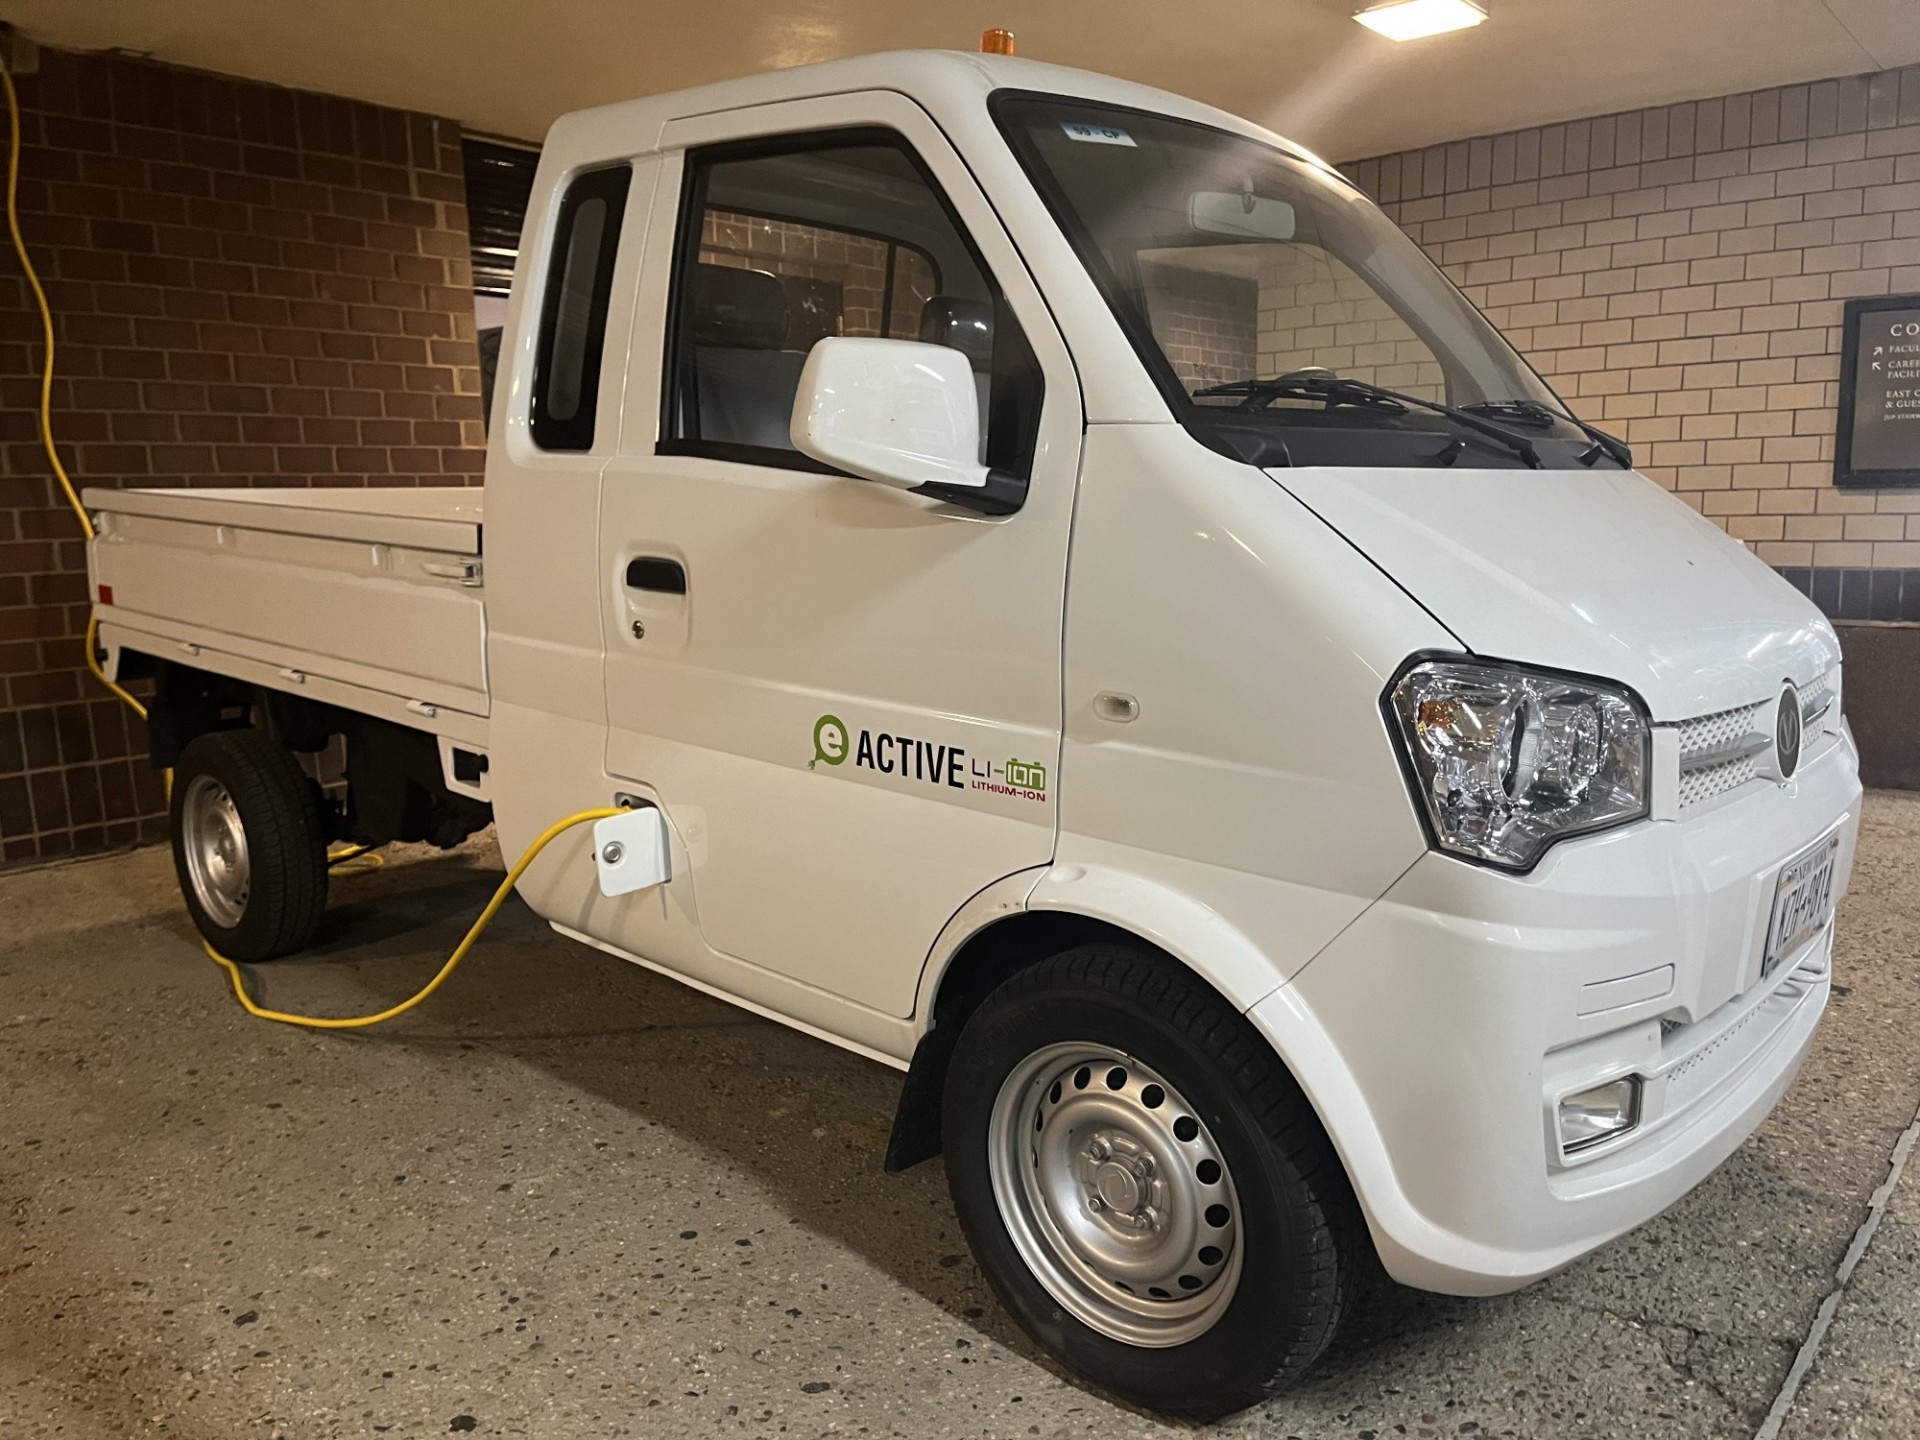 new electric vehicle for facilities and operations